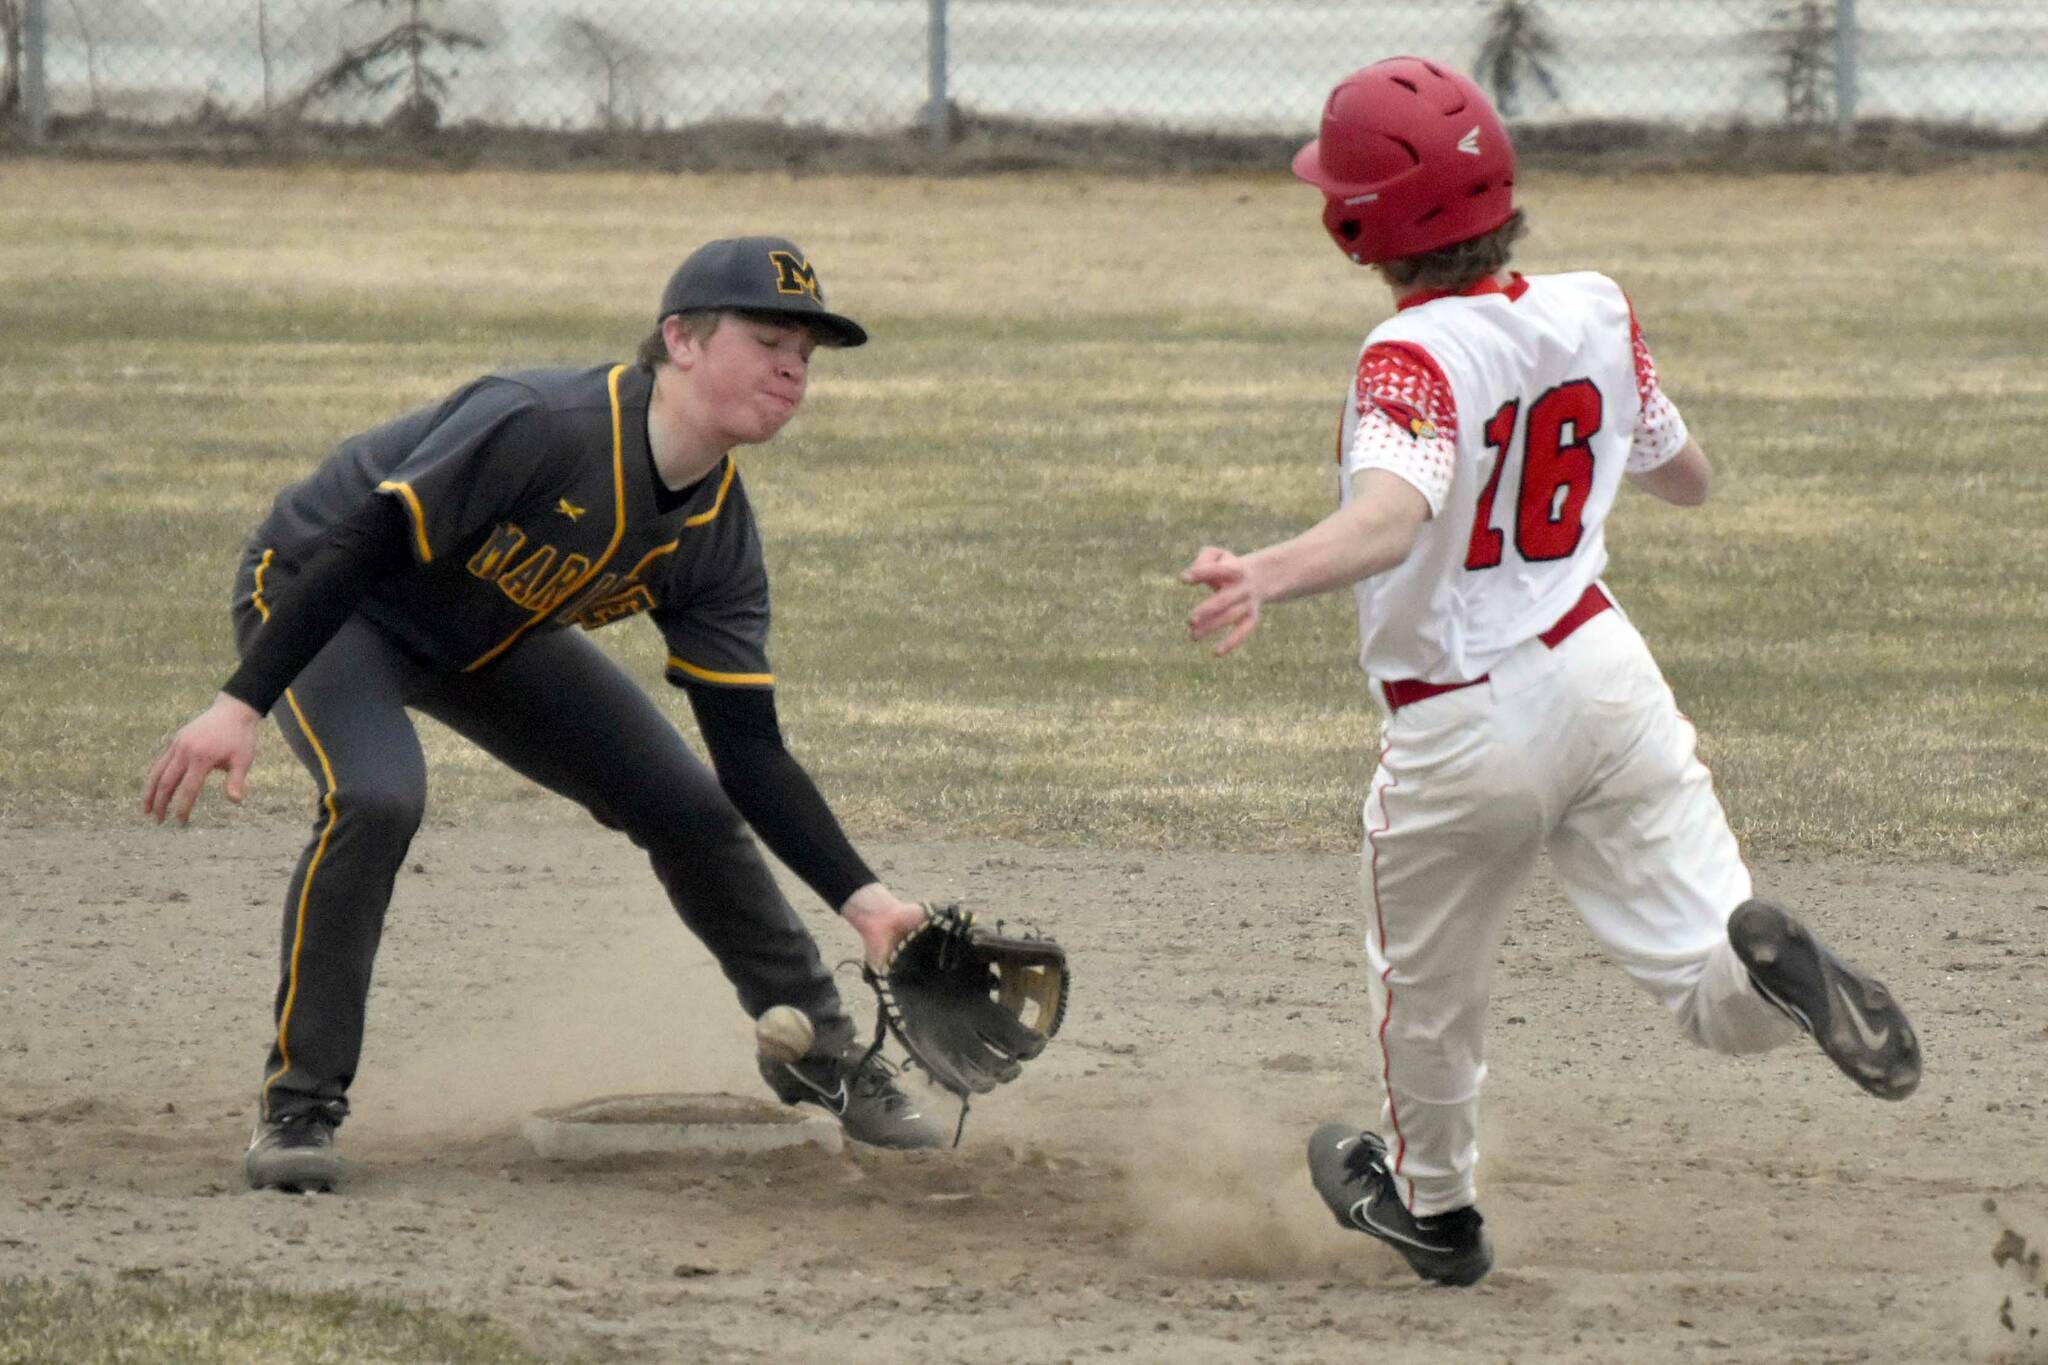 Kenai Central's Avery Martin arrives safely at second base in front of Homer second baseman Preston Stanislaw on Tuesday, May 9, 2023, at the Kenai Little League fields in Kenai, Alaska. (Photo by Jeff Helminiak/Peninsula Clarion)